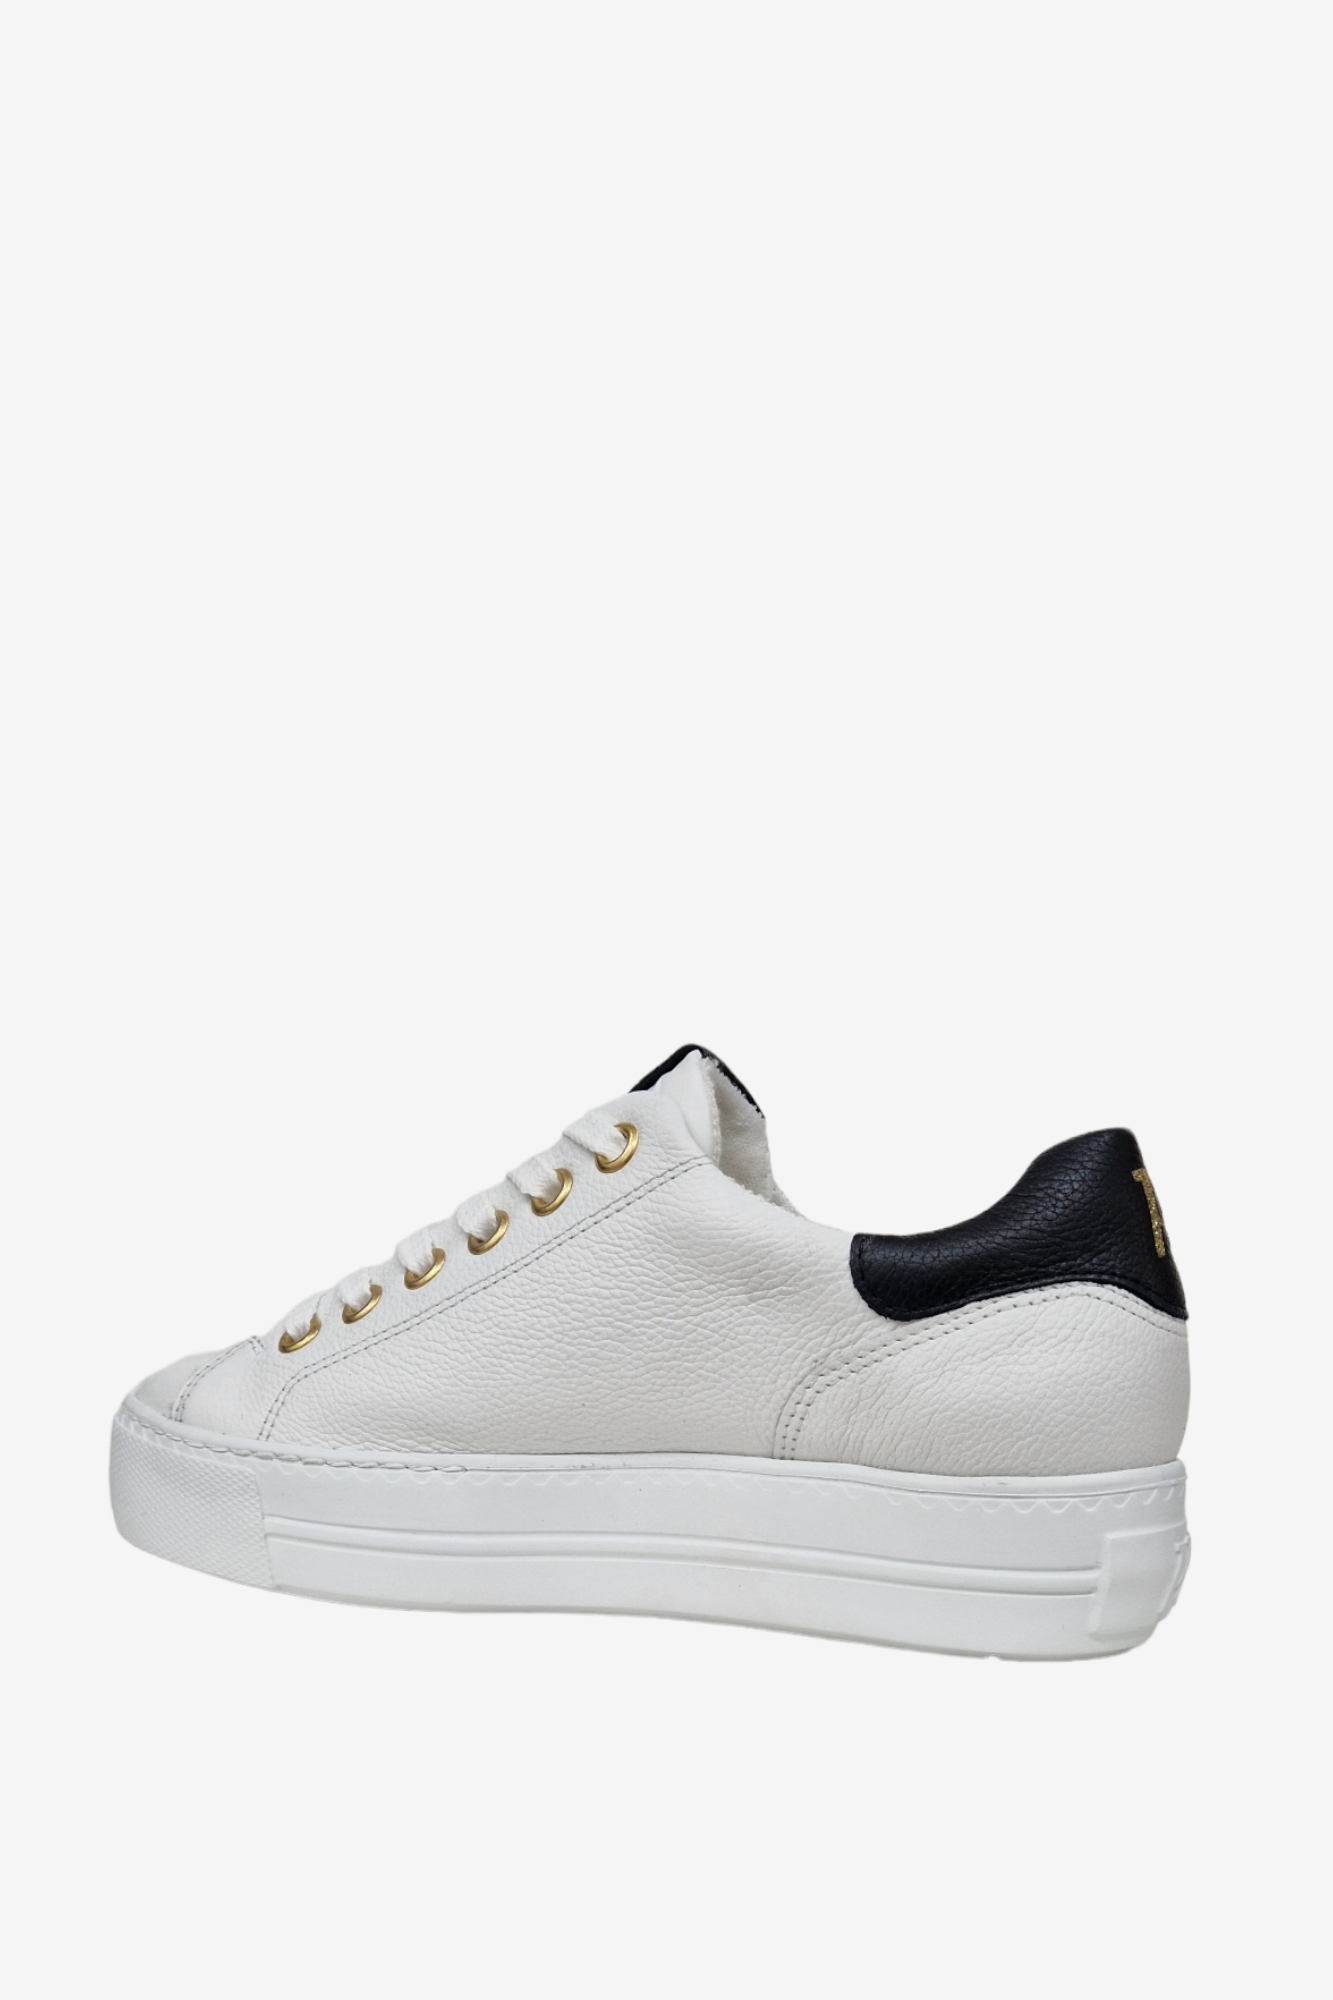 PAUL GREEN 5320 WHITE/BLACK LEATHER TRAINER